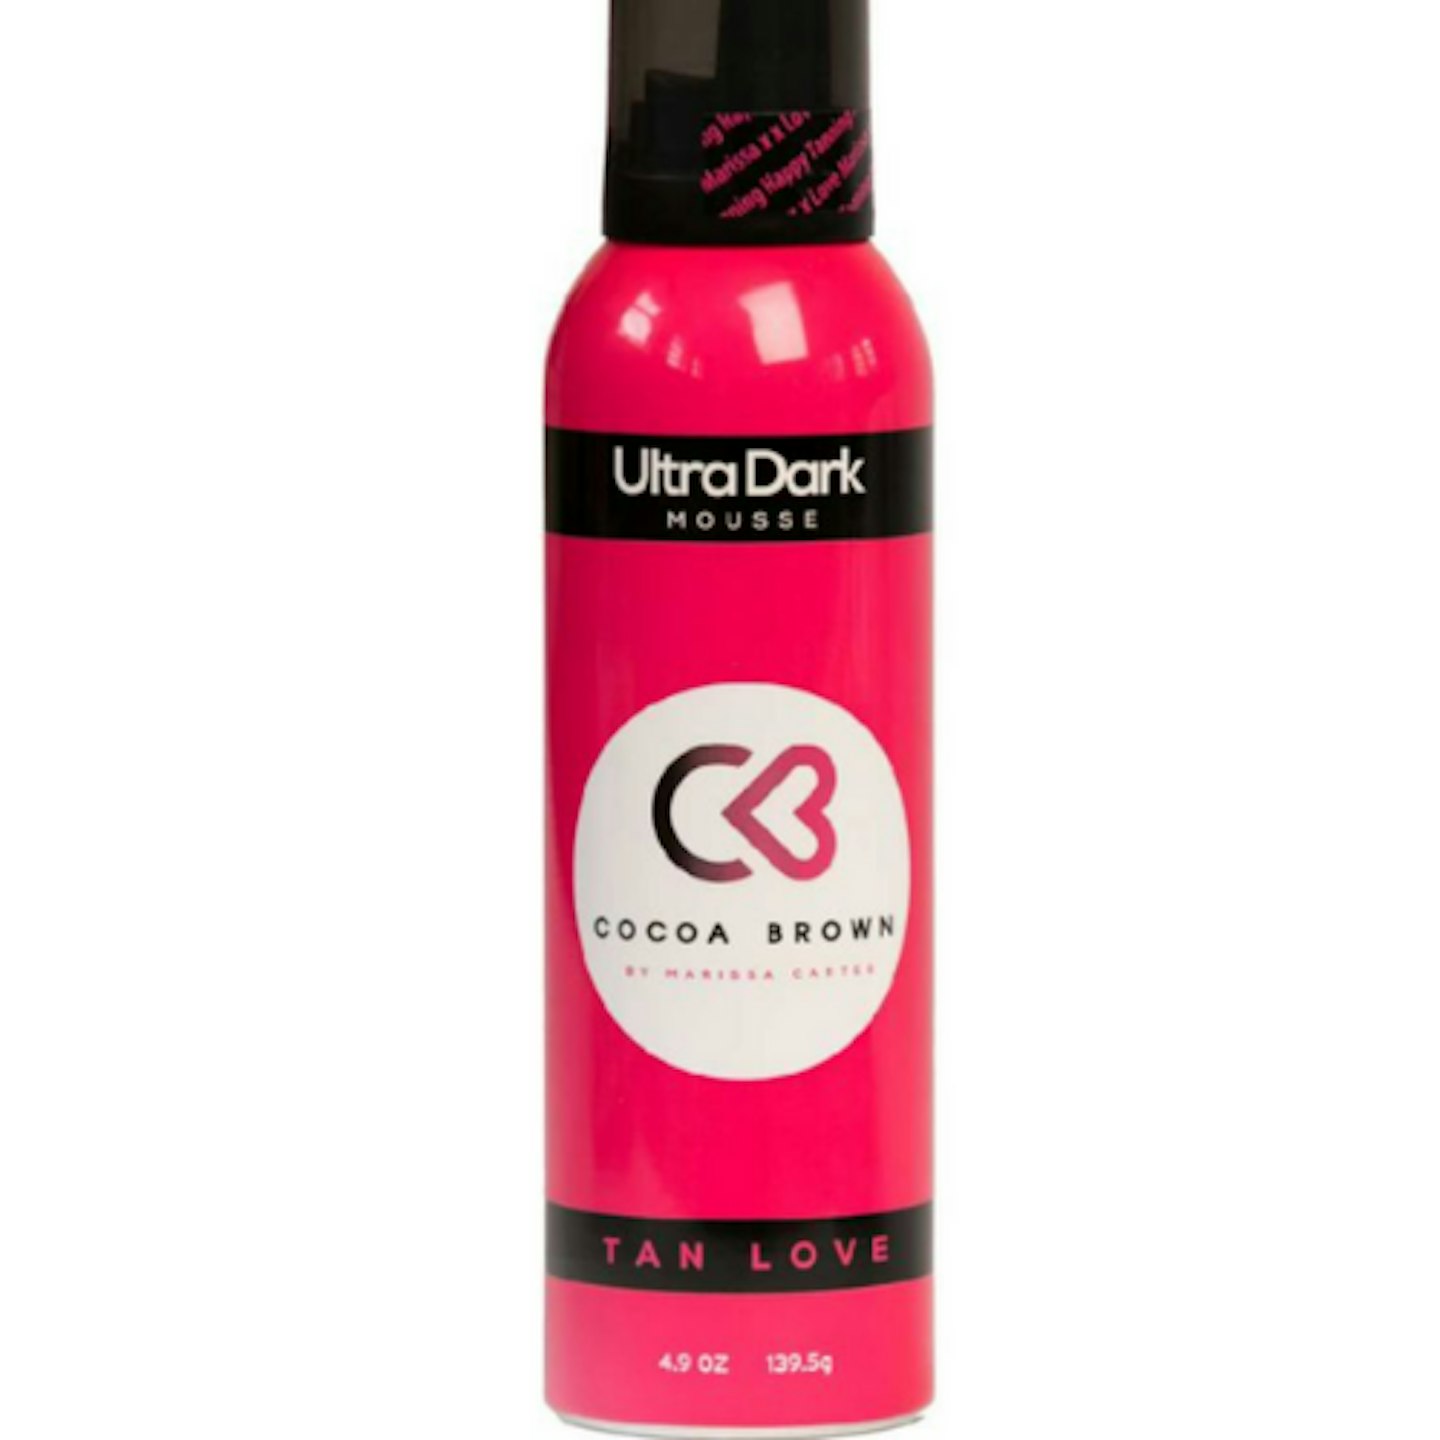 Cocoa Brown 1 Hour Tan Mousse Ultra Dark